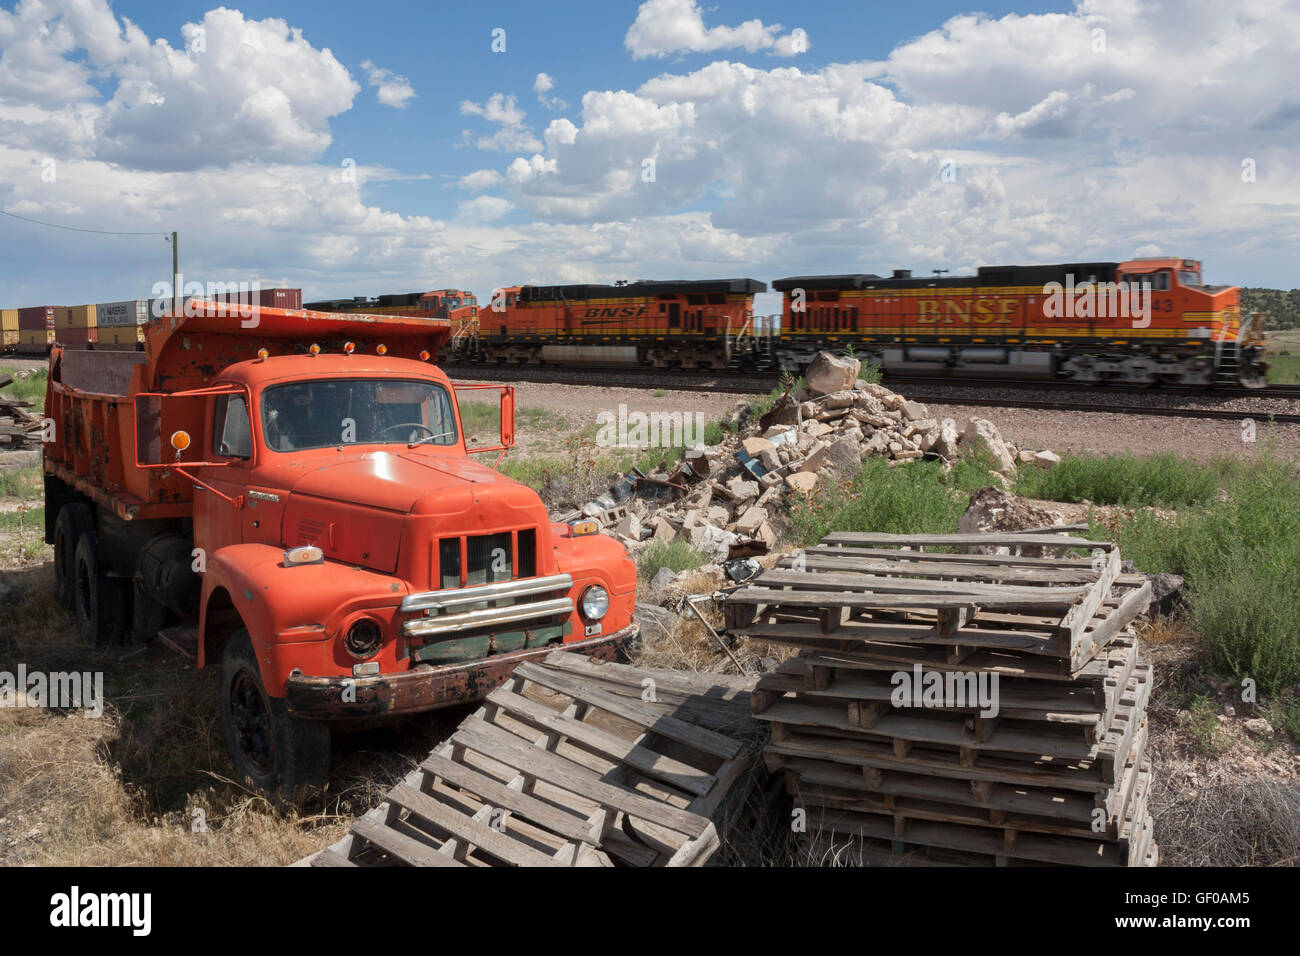 1954 International Harvester tipper truck R190 with pallets and train speeding past in background Stock Photo